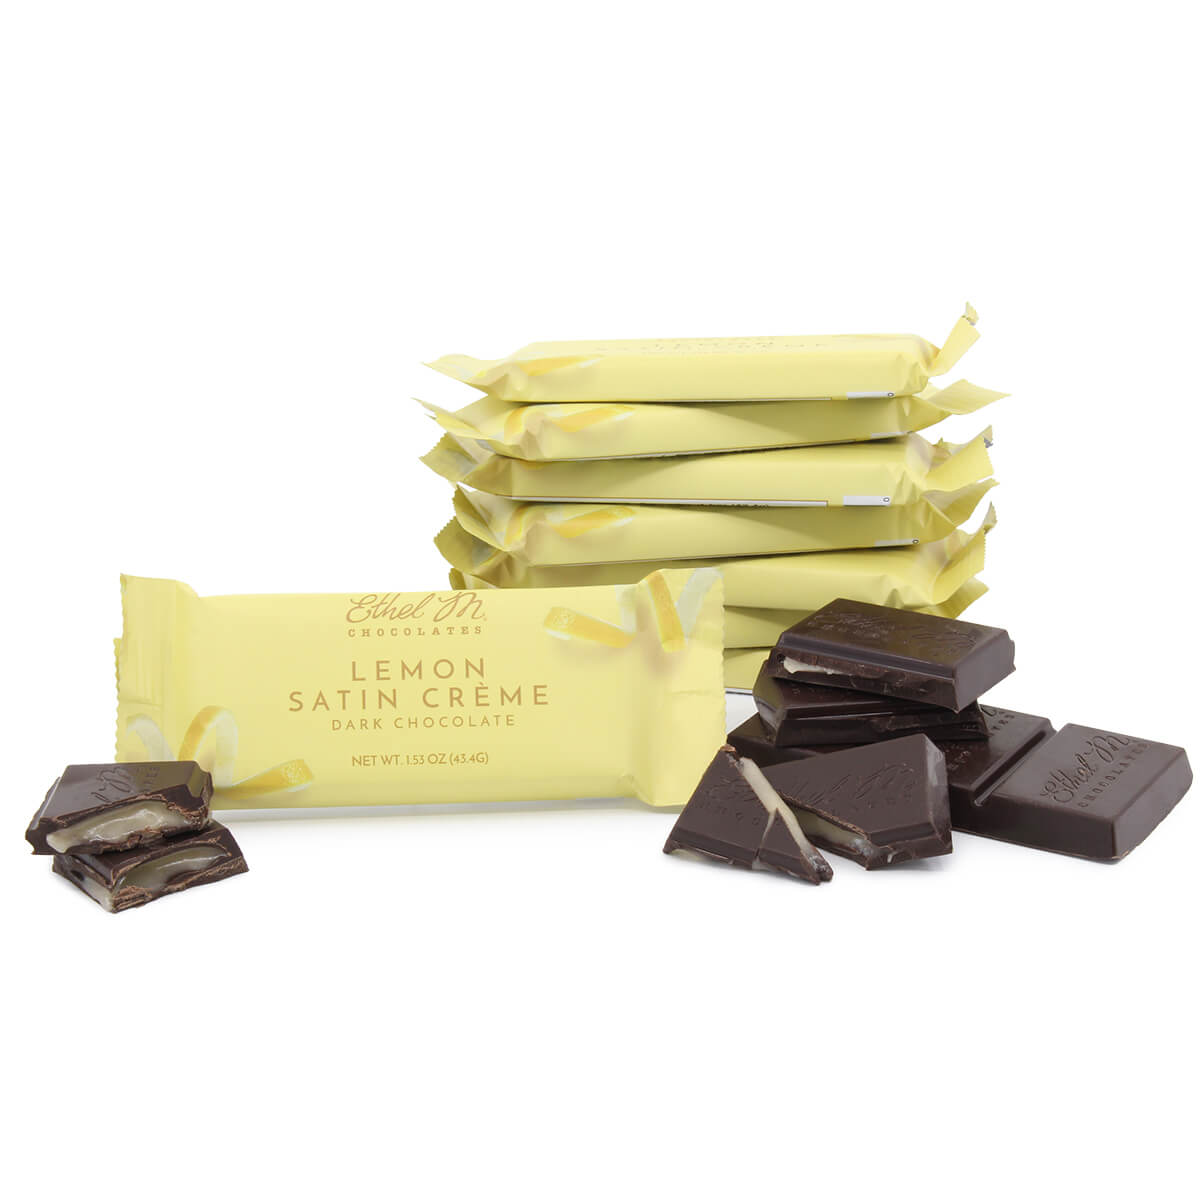 Grab and go with our best-selling Lemon Satin Creme Bar! Each bar is made of premium cream and lemon puree.